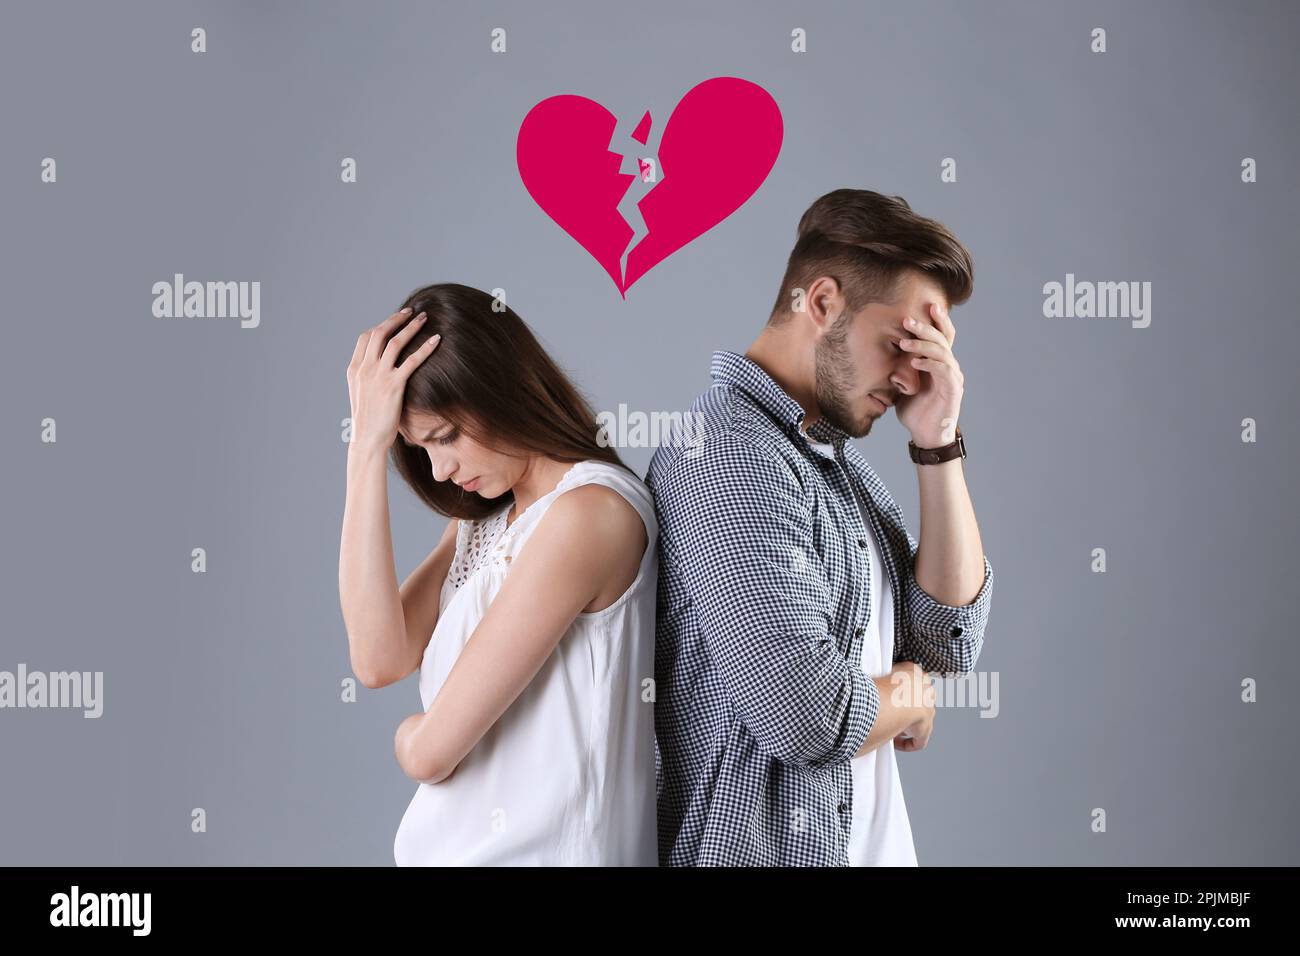 Upset young couple and illustration of broken heart on grey background. Relationship problems Stock Photo